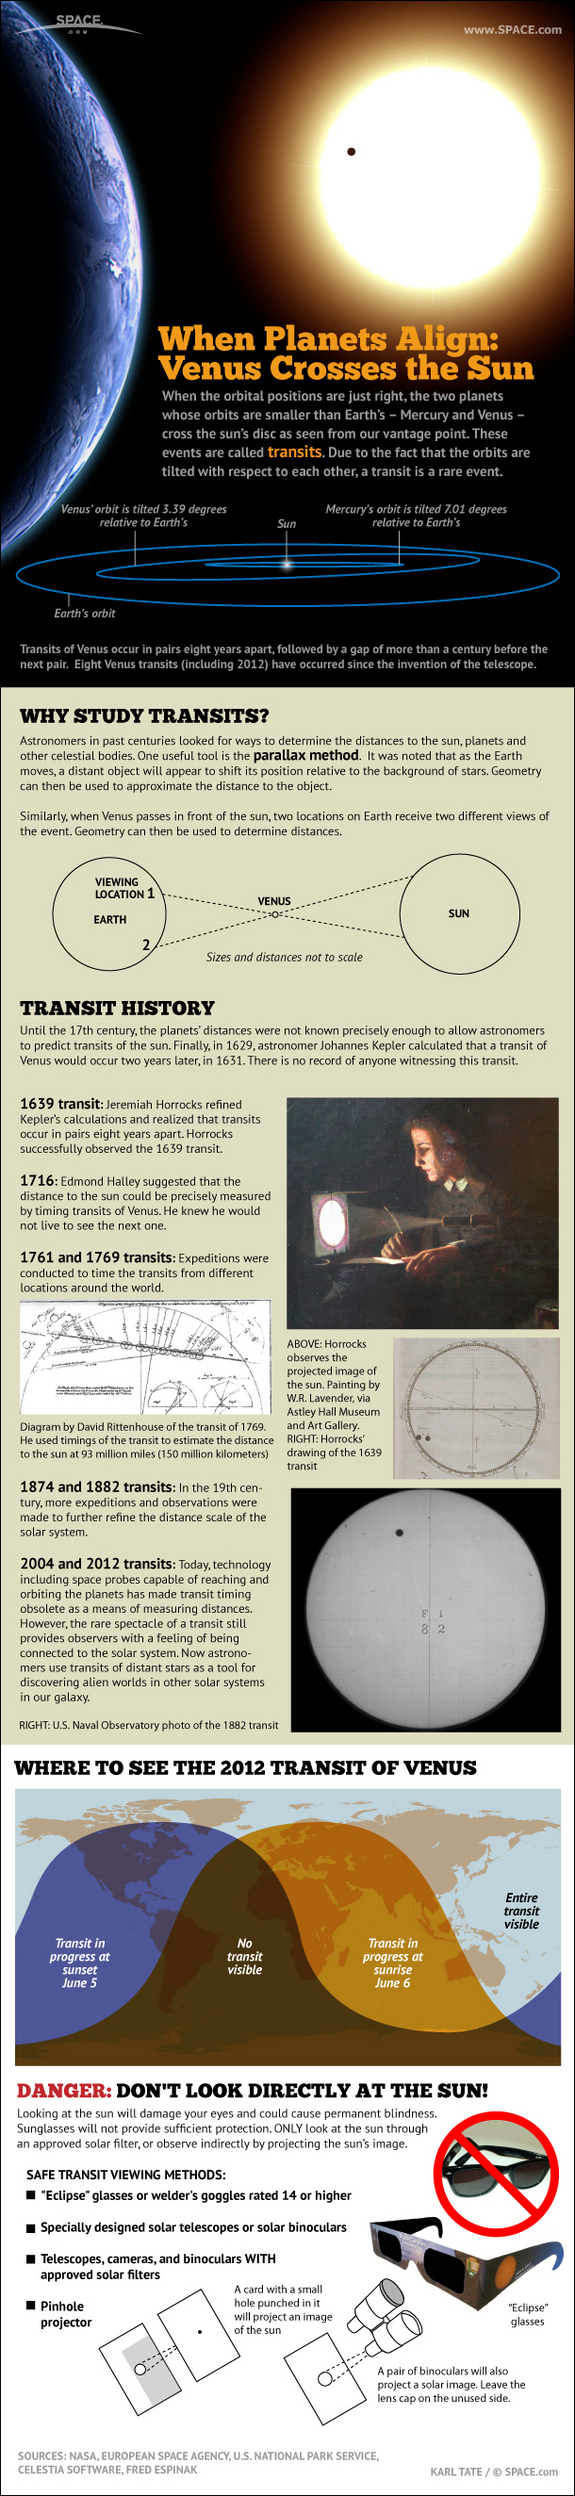 Find out about the planet Venus' dramatic trip across the face of the sun in June 2012 in this SPACE.com infographic.